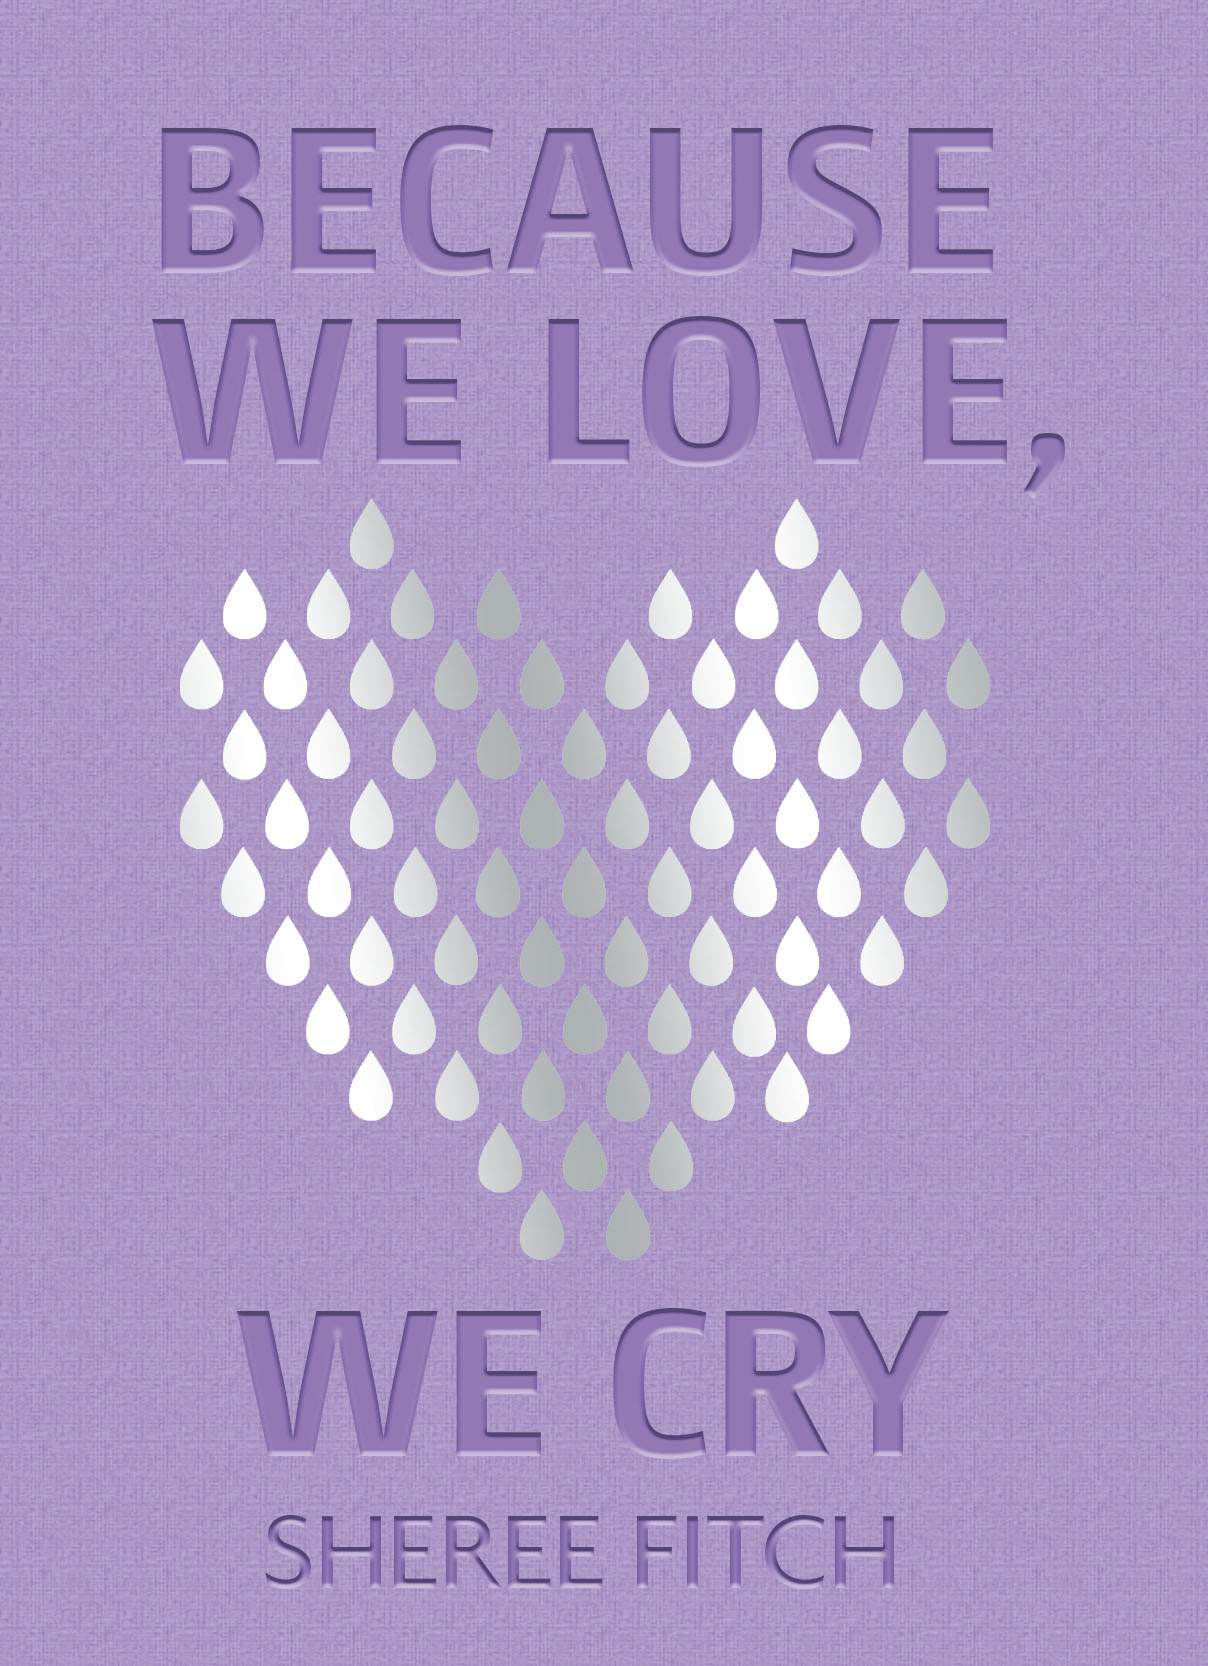 Because We Love, We Cry